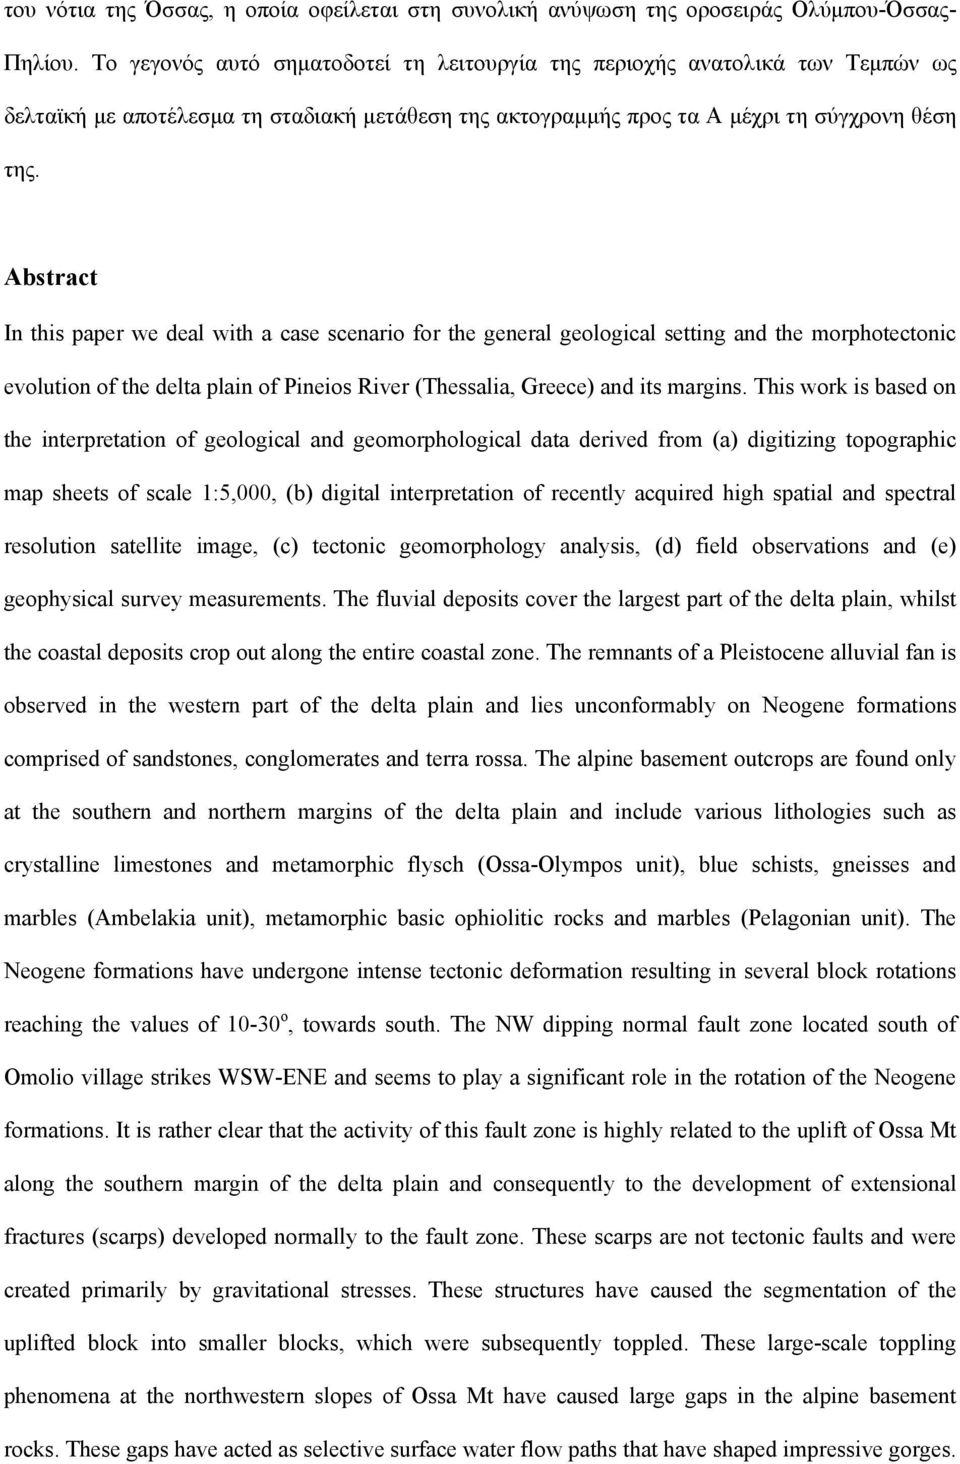 Abstract In this paper we deal with a case scenario for the general geological setting and the morphotectonic evolution of the delta plain of Pineios River (Thessalia, Greece) and its margins.